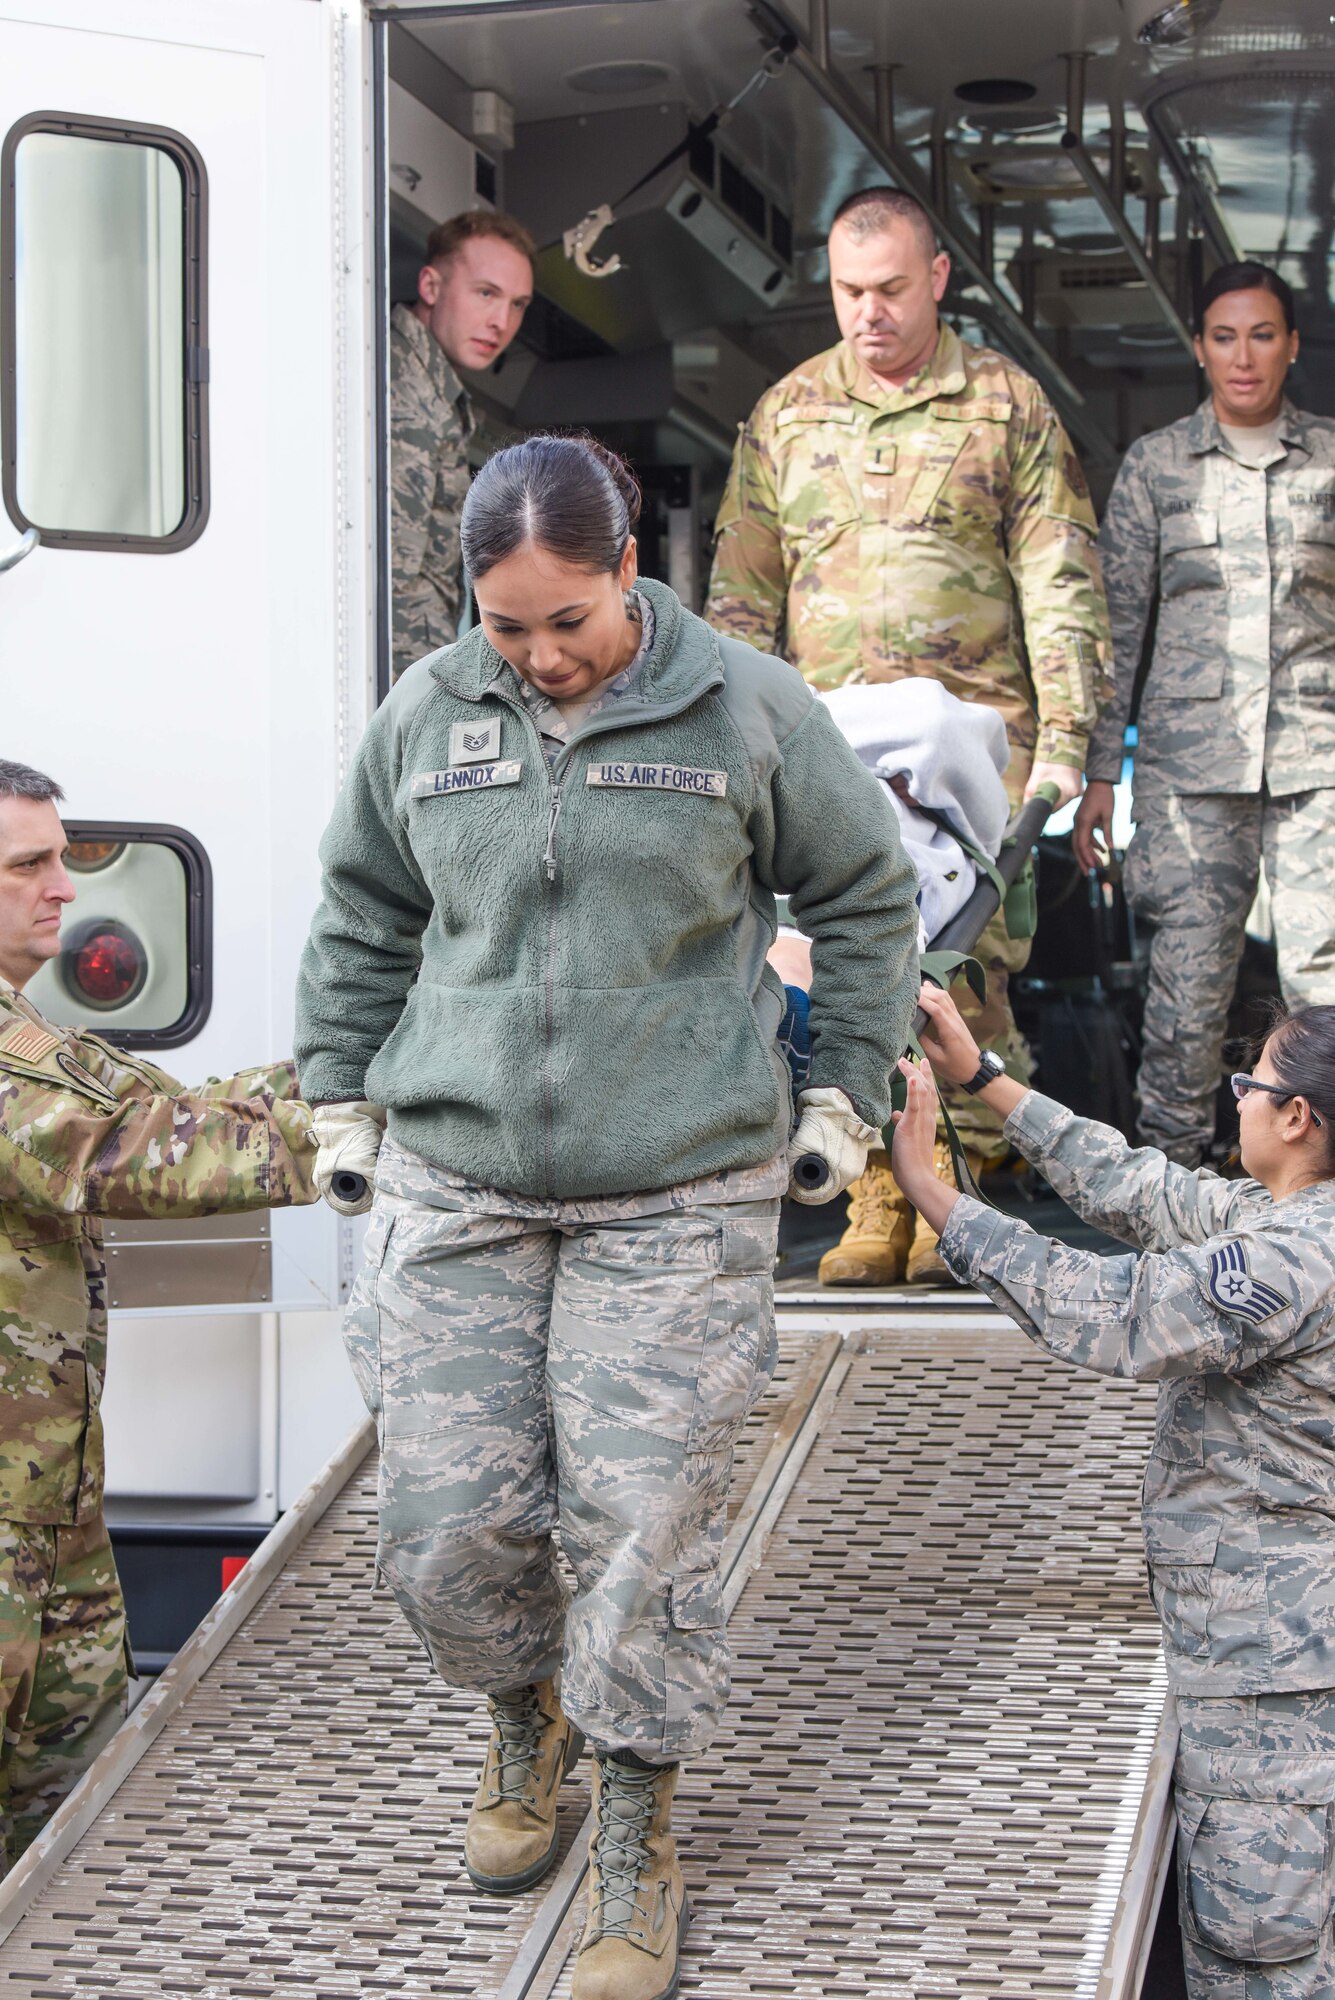 Nurses, pharmacy technicians and flight doctors were among the squadron members who participated in the National Disaster Medical System training exercise.